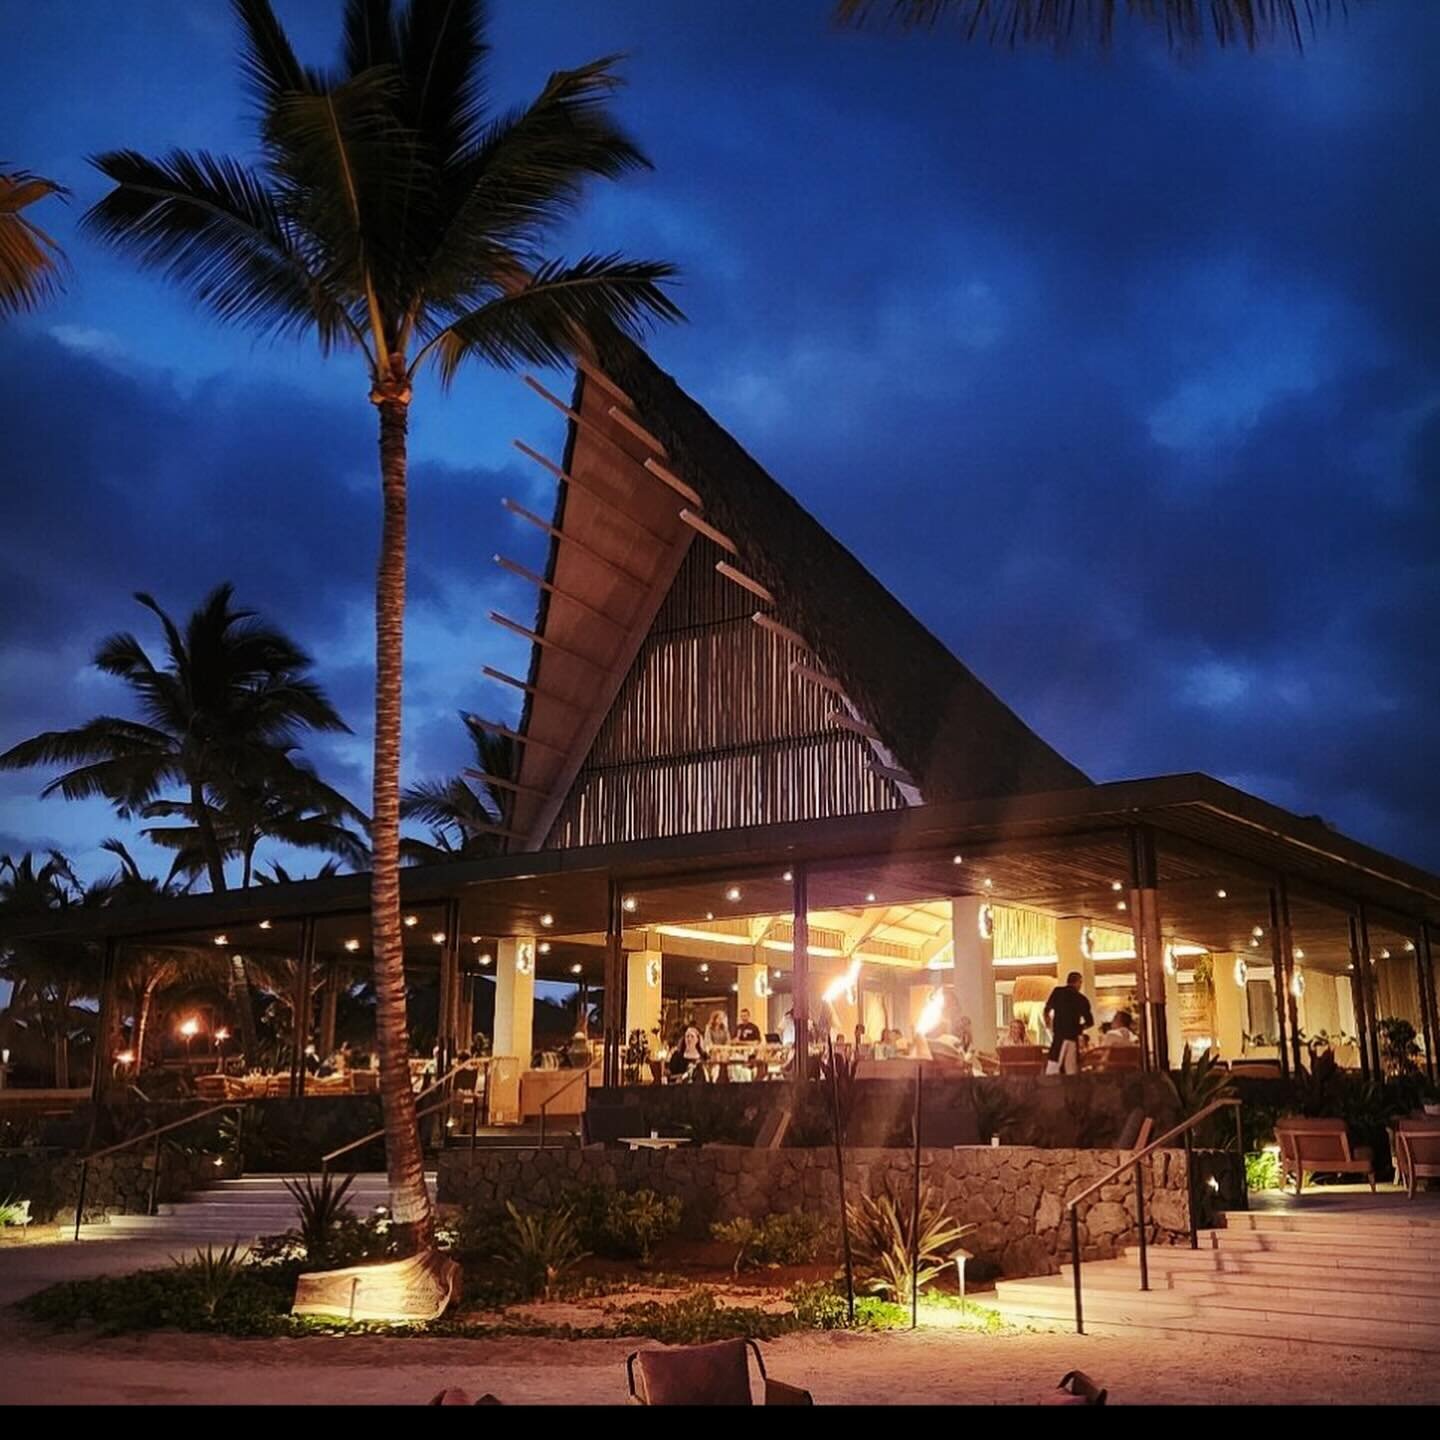 This weekend I was lucky enough to celebrate an early birthday at @konavillagerosewood! Kona Village is a newly rebuilt AMAZING resort on the Kona coast. Now that I&rsquo;ve stayed there, even though it was only for a night lol, I can confidently say